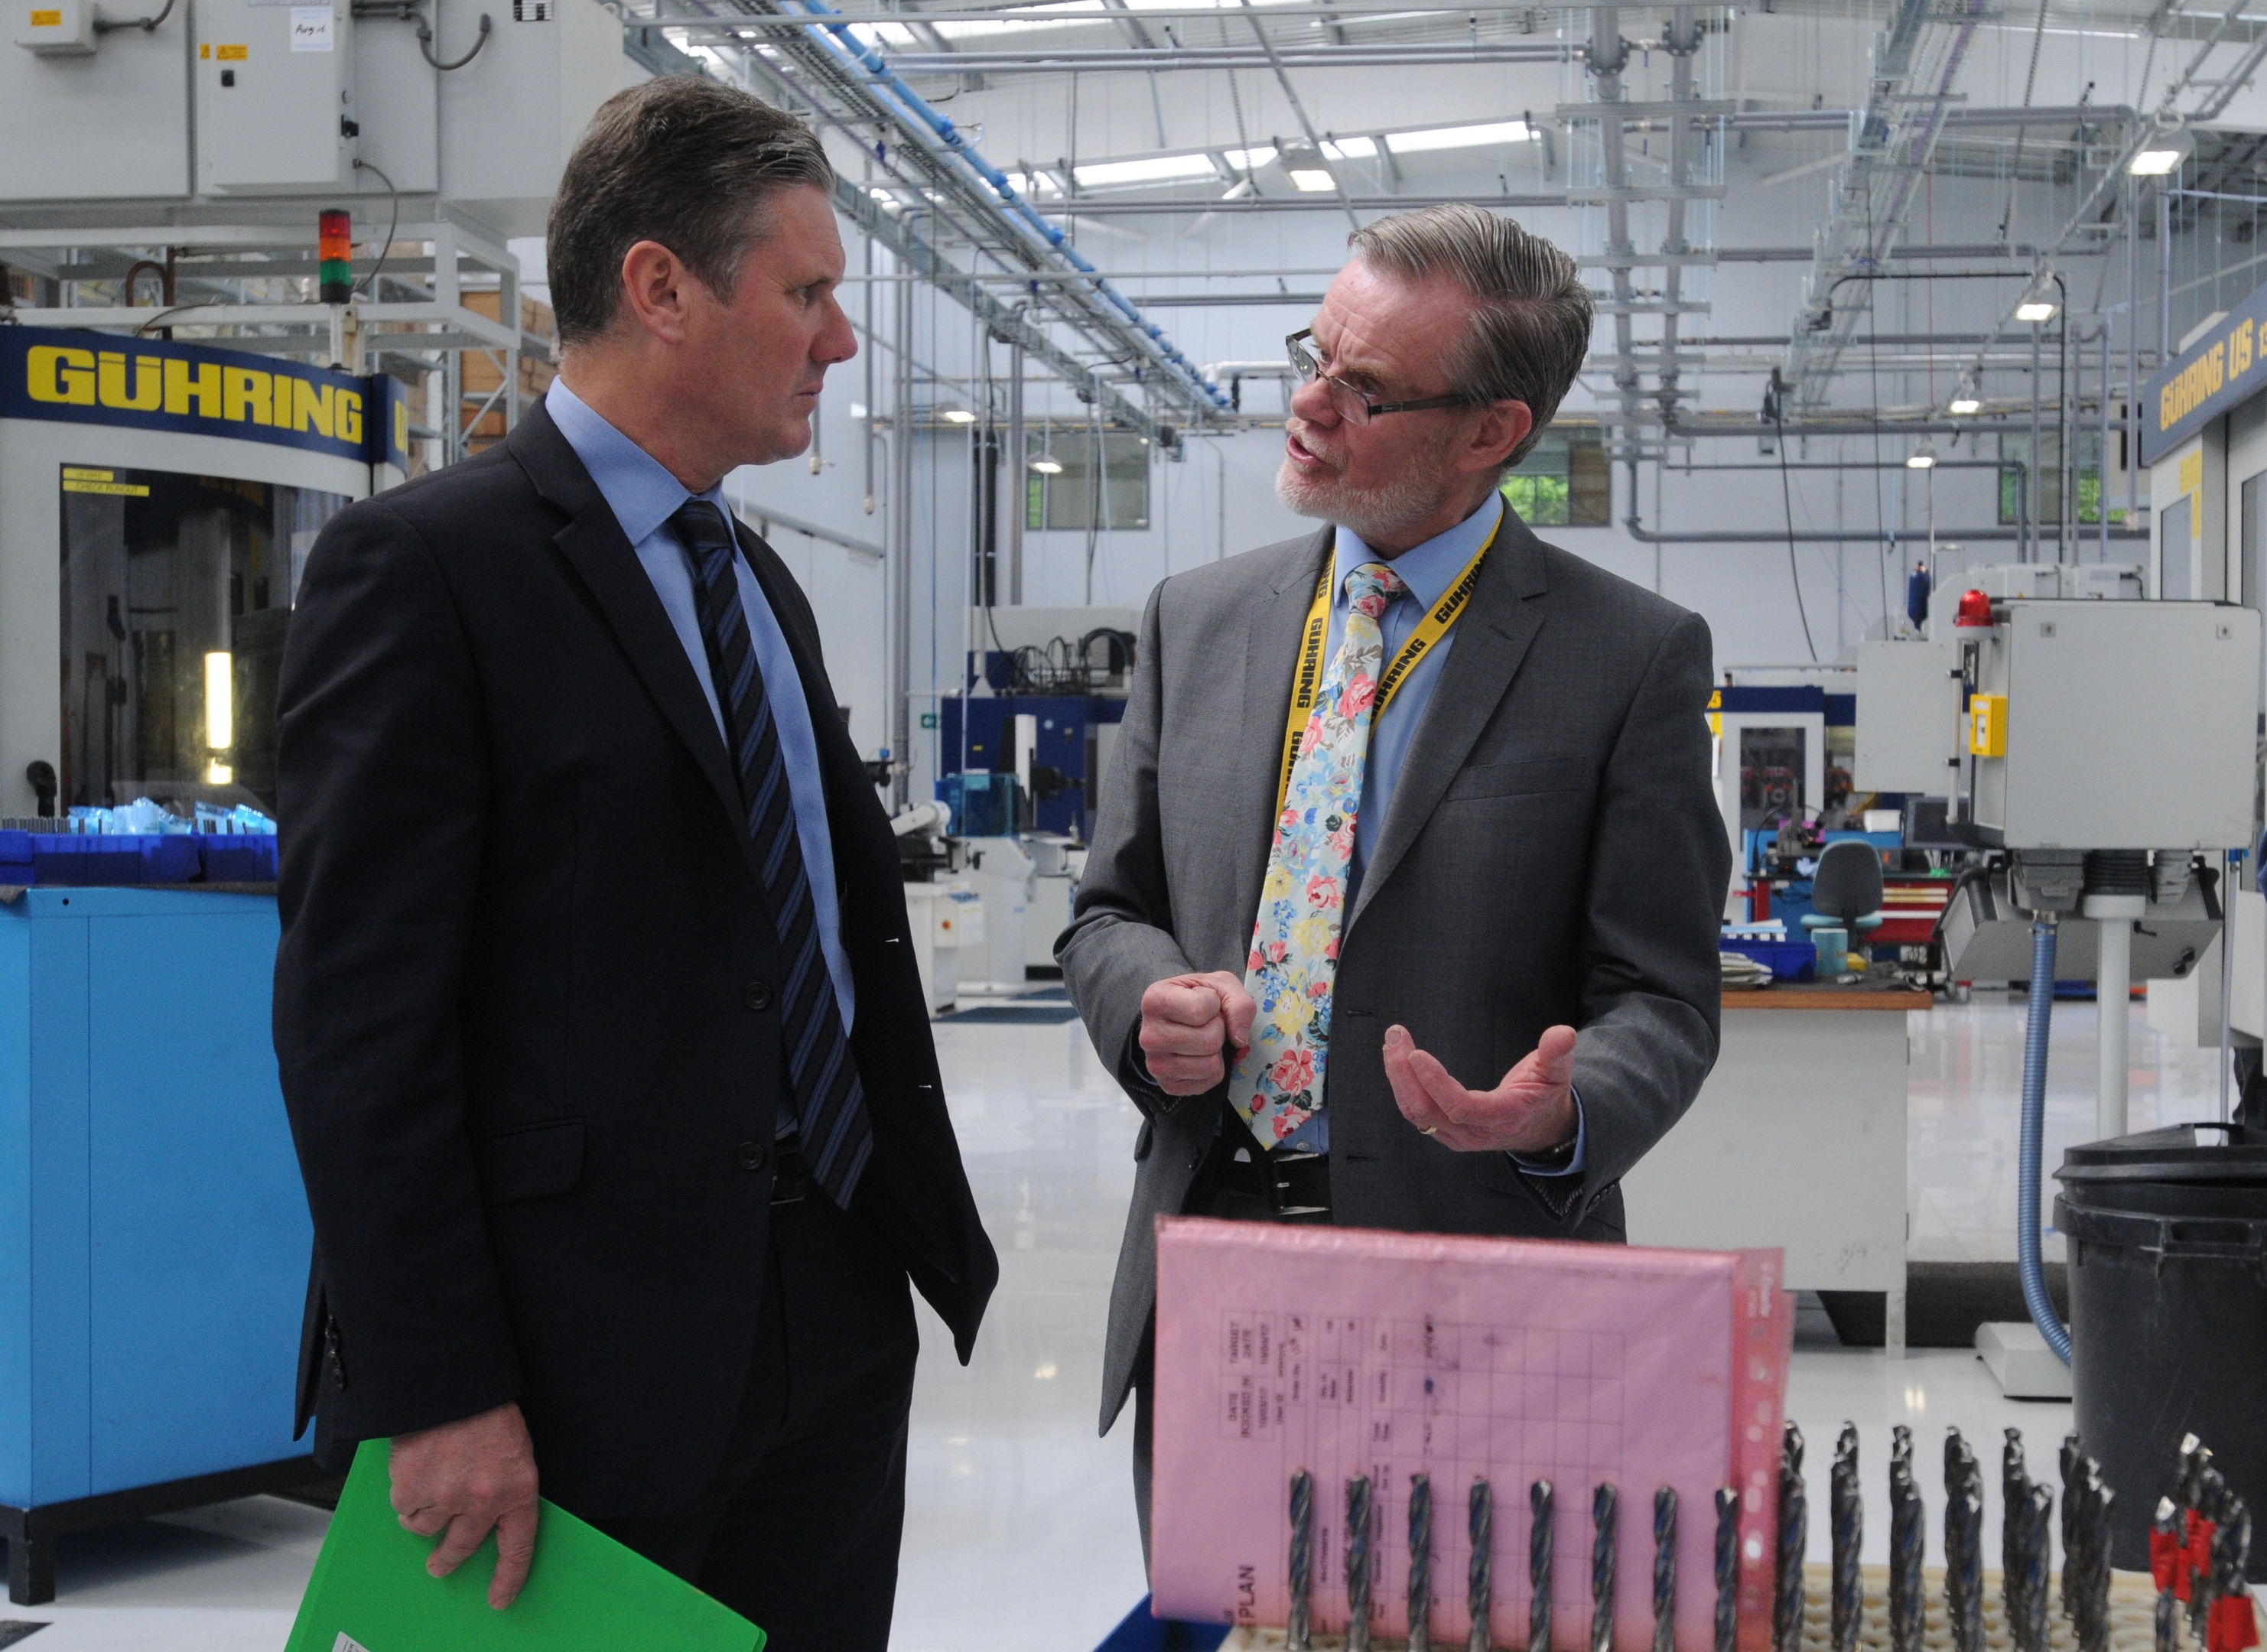 Labour's shadow Brexit minister Sir Keir Starmer (left), talks with Mike Dinsdale, the managing director of toolmaker Guhring's factory in Aston, Birmingham, during a tour of the plant, as Starmer has claimed Theresa May's approach to talks with the EU is simply not working - after getting off to a "very, very bad" start. (Matthew Cooper/PA Wire)